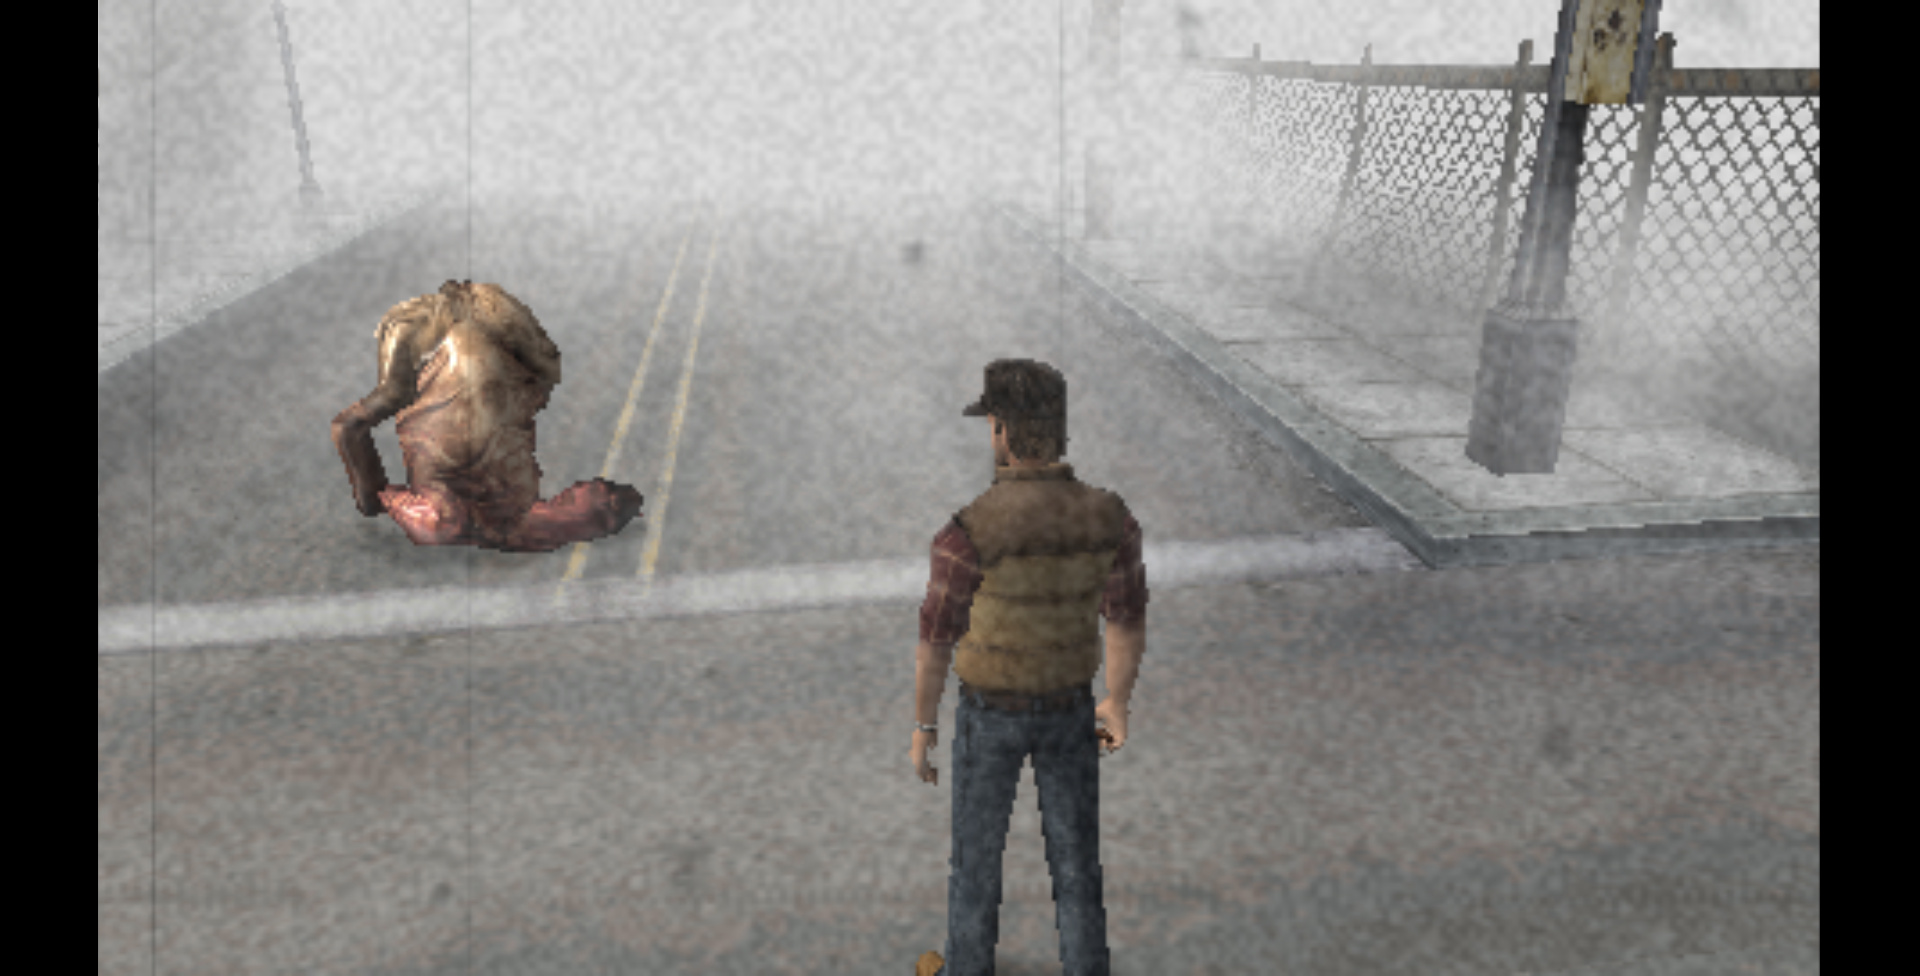 Silent Hills. History Of The Series 